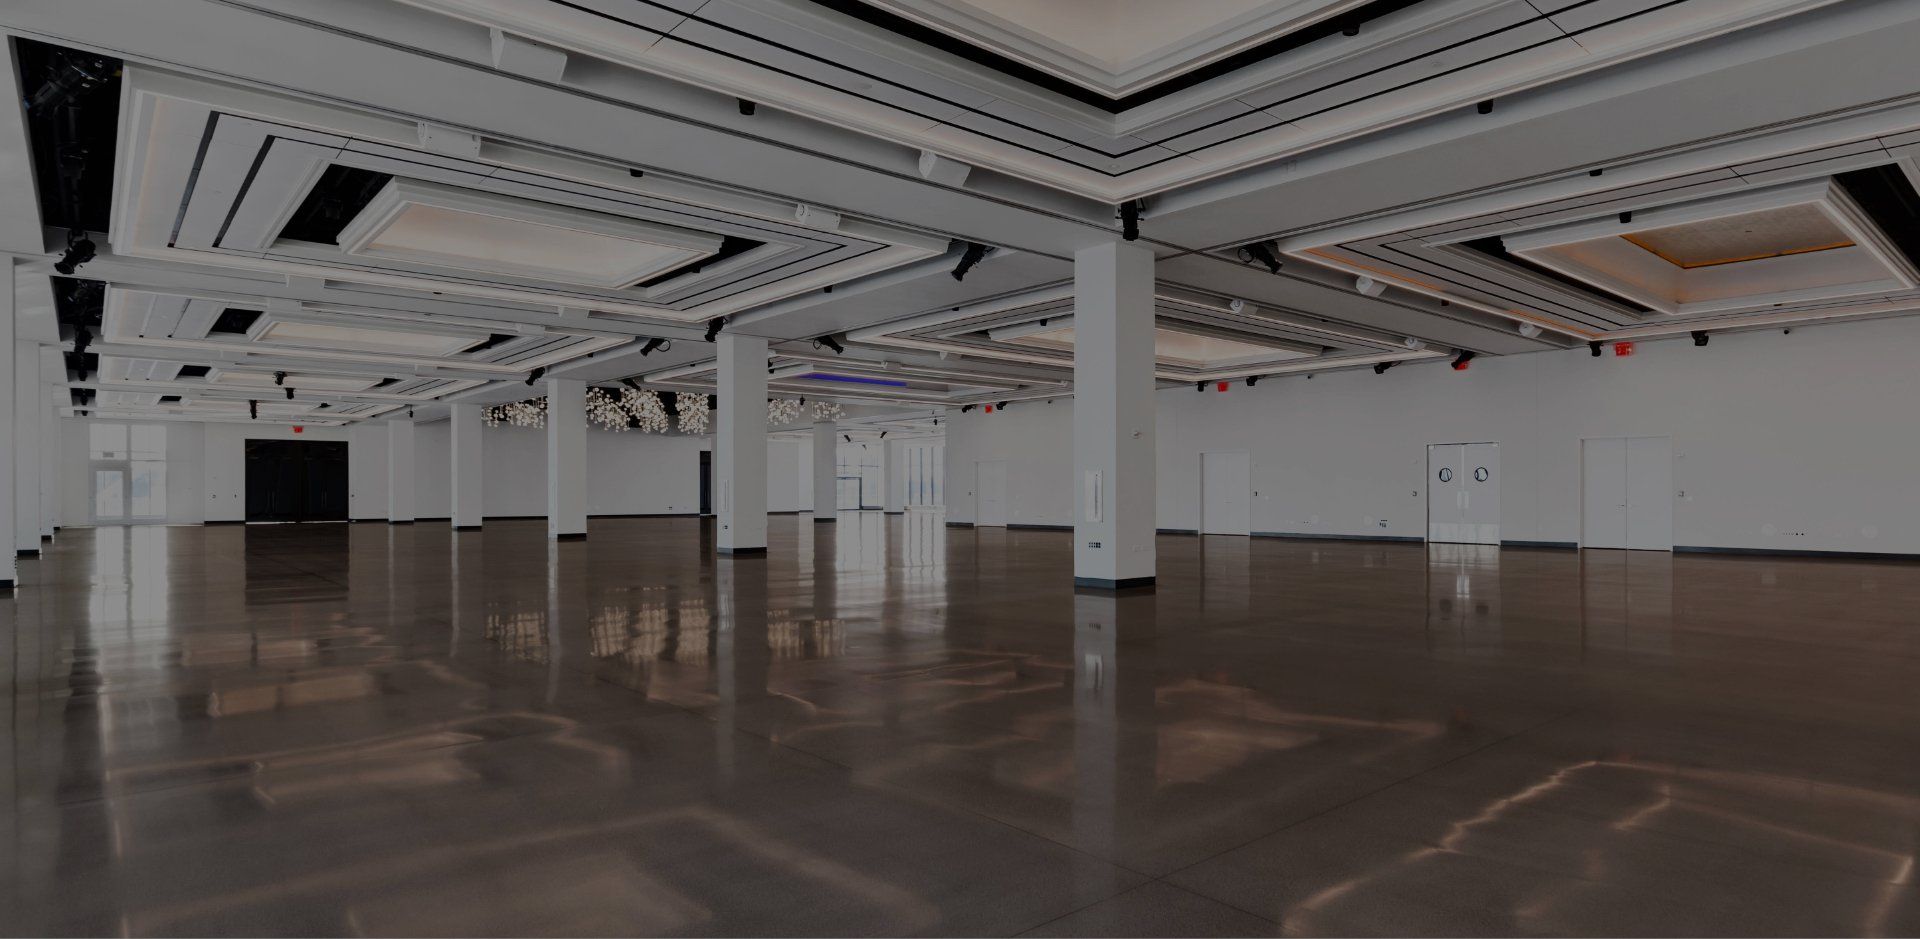 A large empty room with a shiny floor and white walls.